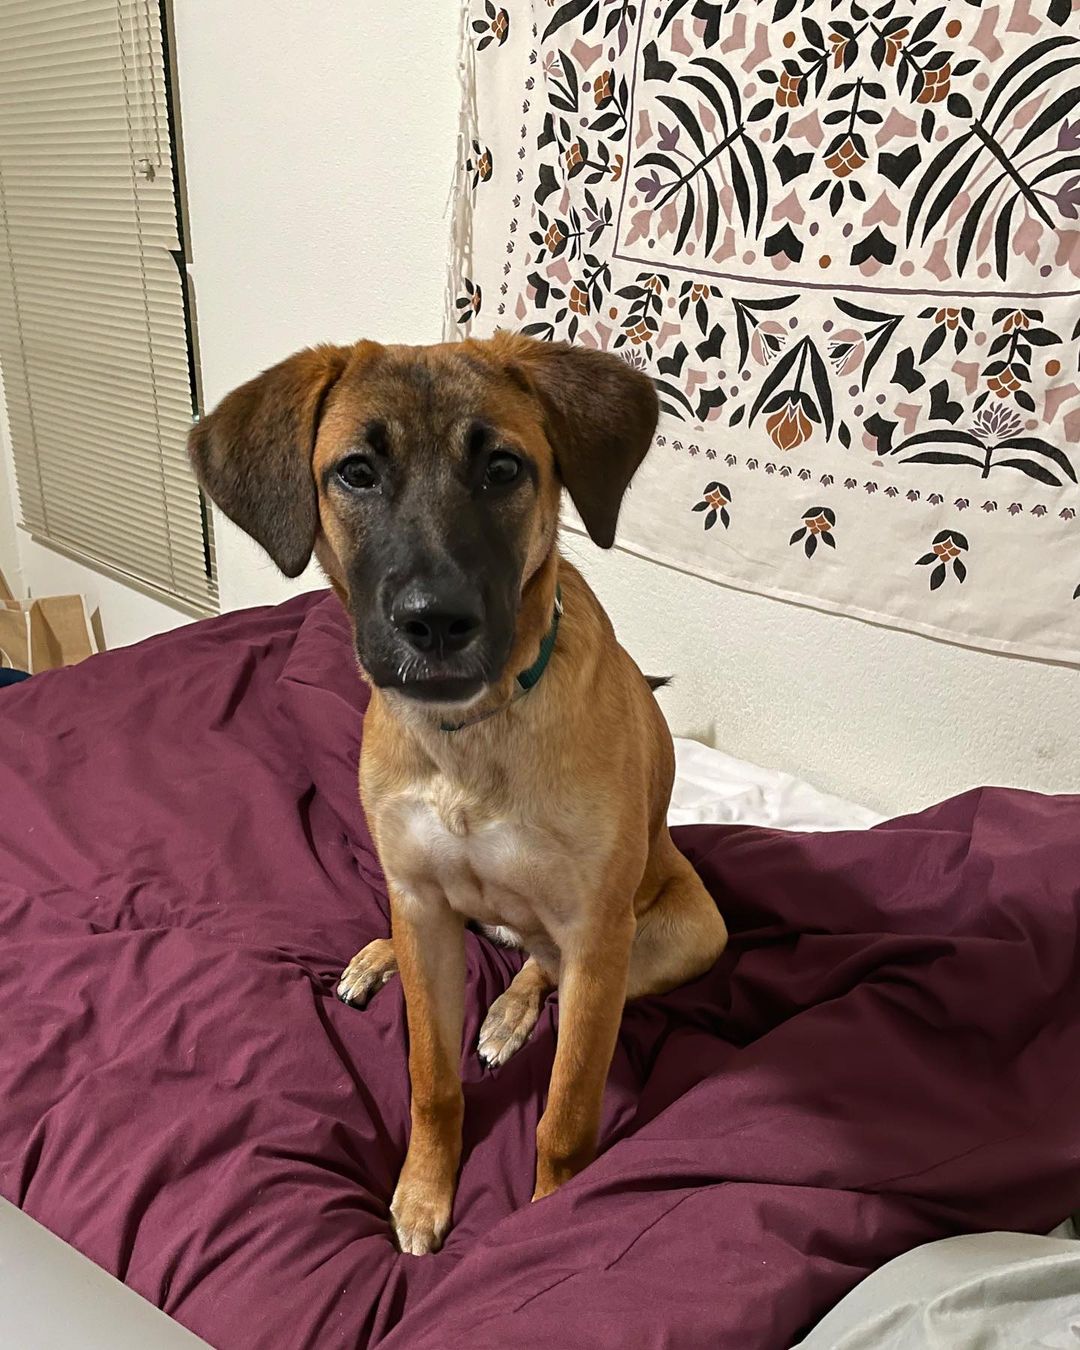 𝐄𝐌𝐄𝐑𝐘 🐕APPLICATION CLOSED
Age: 9 months old old
Gender: F
Weight: 42lbs
Breed: Shepherd/Hound mix
Dog: ✔️
Kids: ✔️
Cats: N/A
House-trained: ✔️
Crate trained: In Training
Leash: ✔️
Fostered In: Oakland, CA
____

Meet Emery! 🐶 Emery is an adorable 9 months old Shepherd/Hound mix puppy. Emery loves playing with other dogs outside and is great with people. She is working on walking on a leash, she does pull a bit and gets curious, but overall does great on walks. She knows basic commands: sit, shake, down, come, stay and is learning 